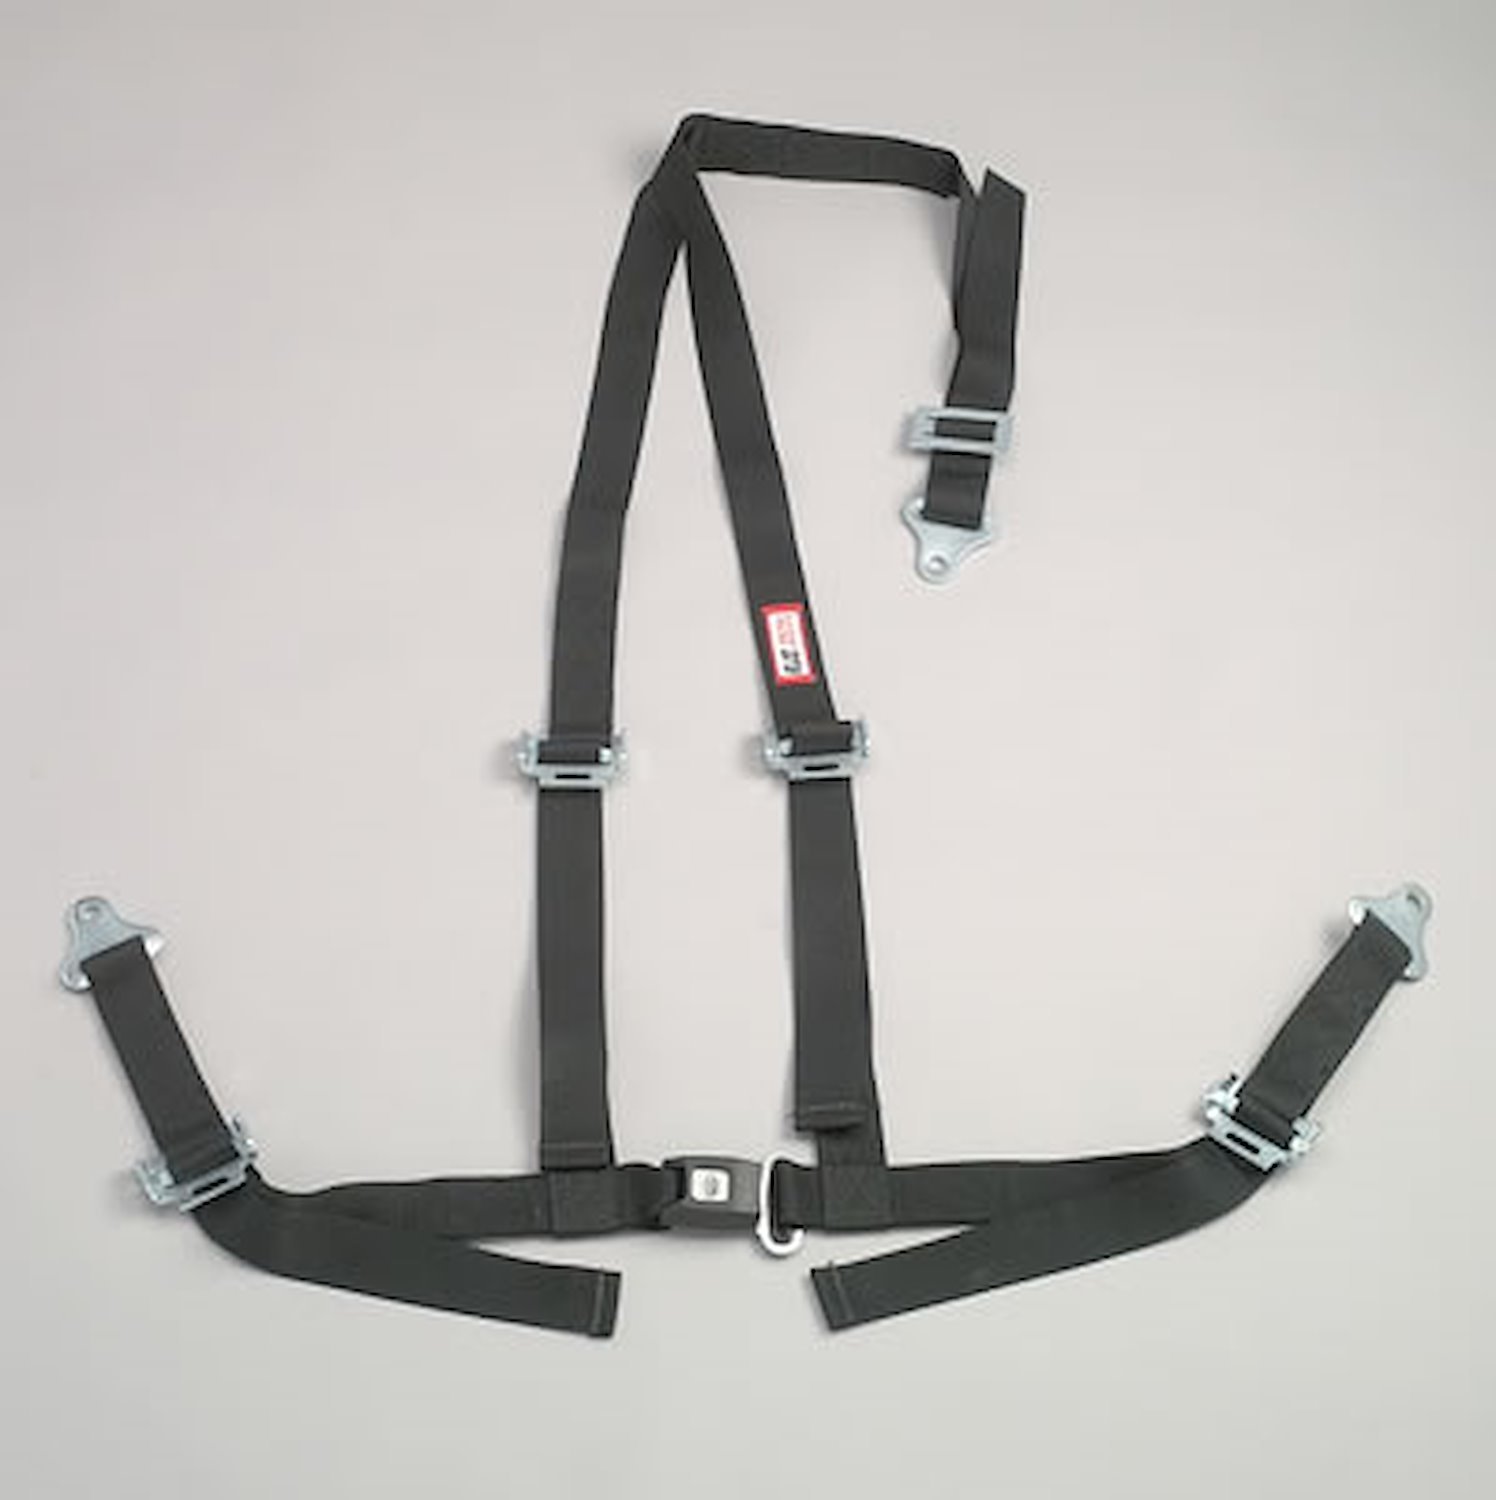 NON-SFI B&T HARNESS 2 PULL UP Lap Belt 2 S. H. V ROLL BAR Mount ALL WRAP ENDS RED